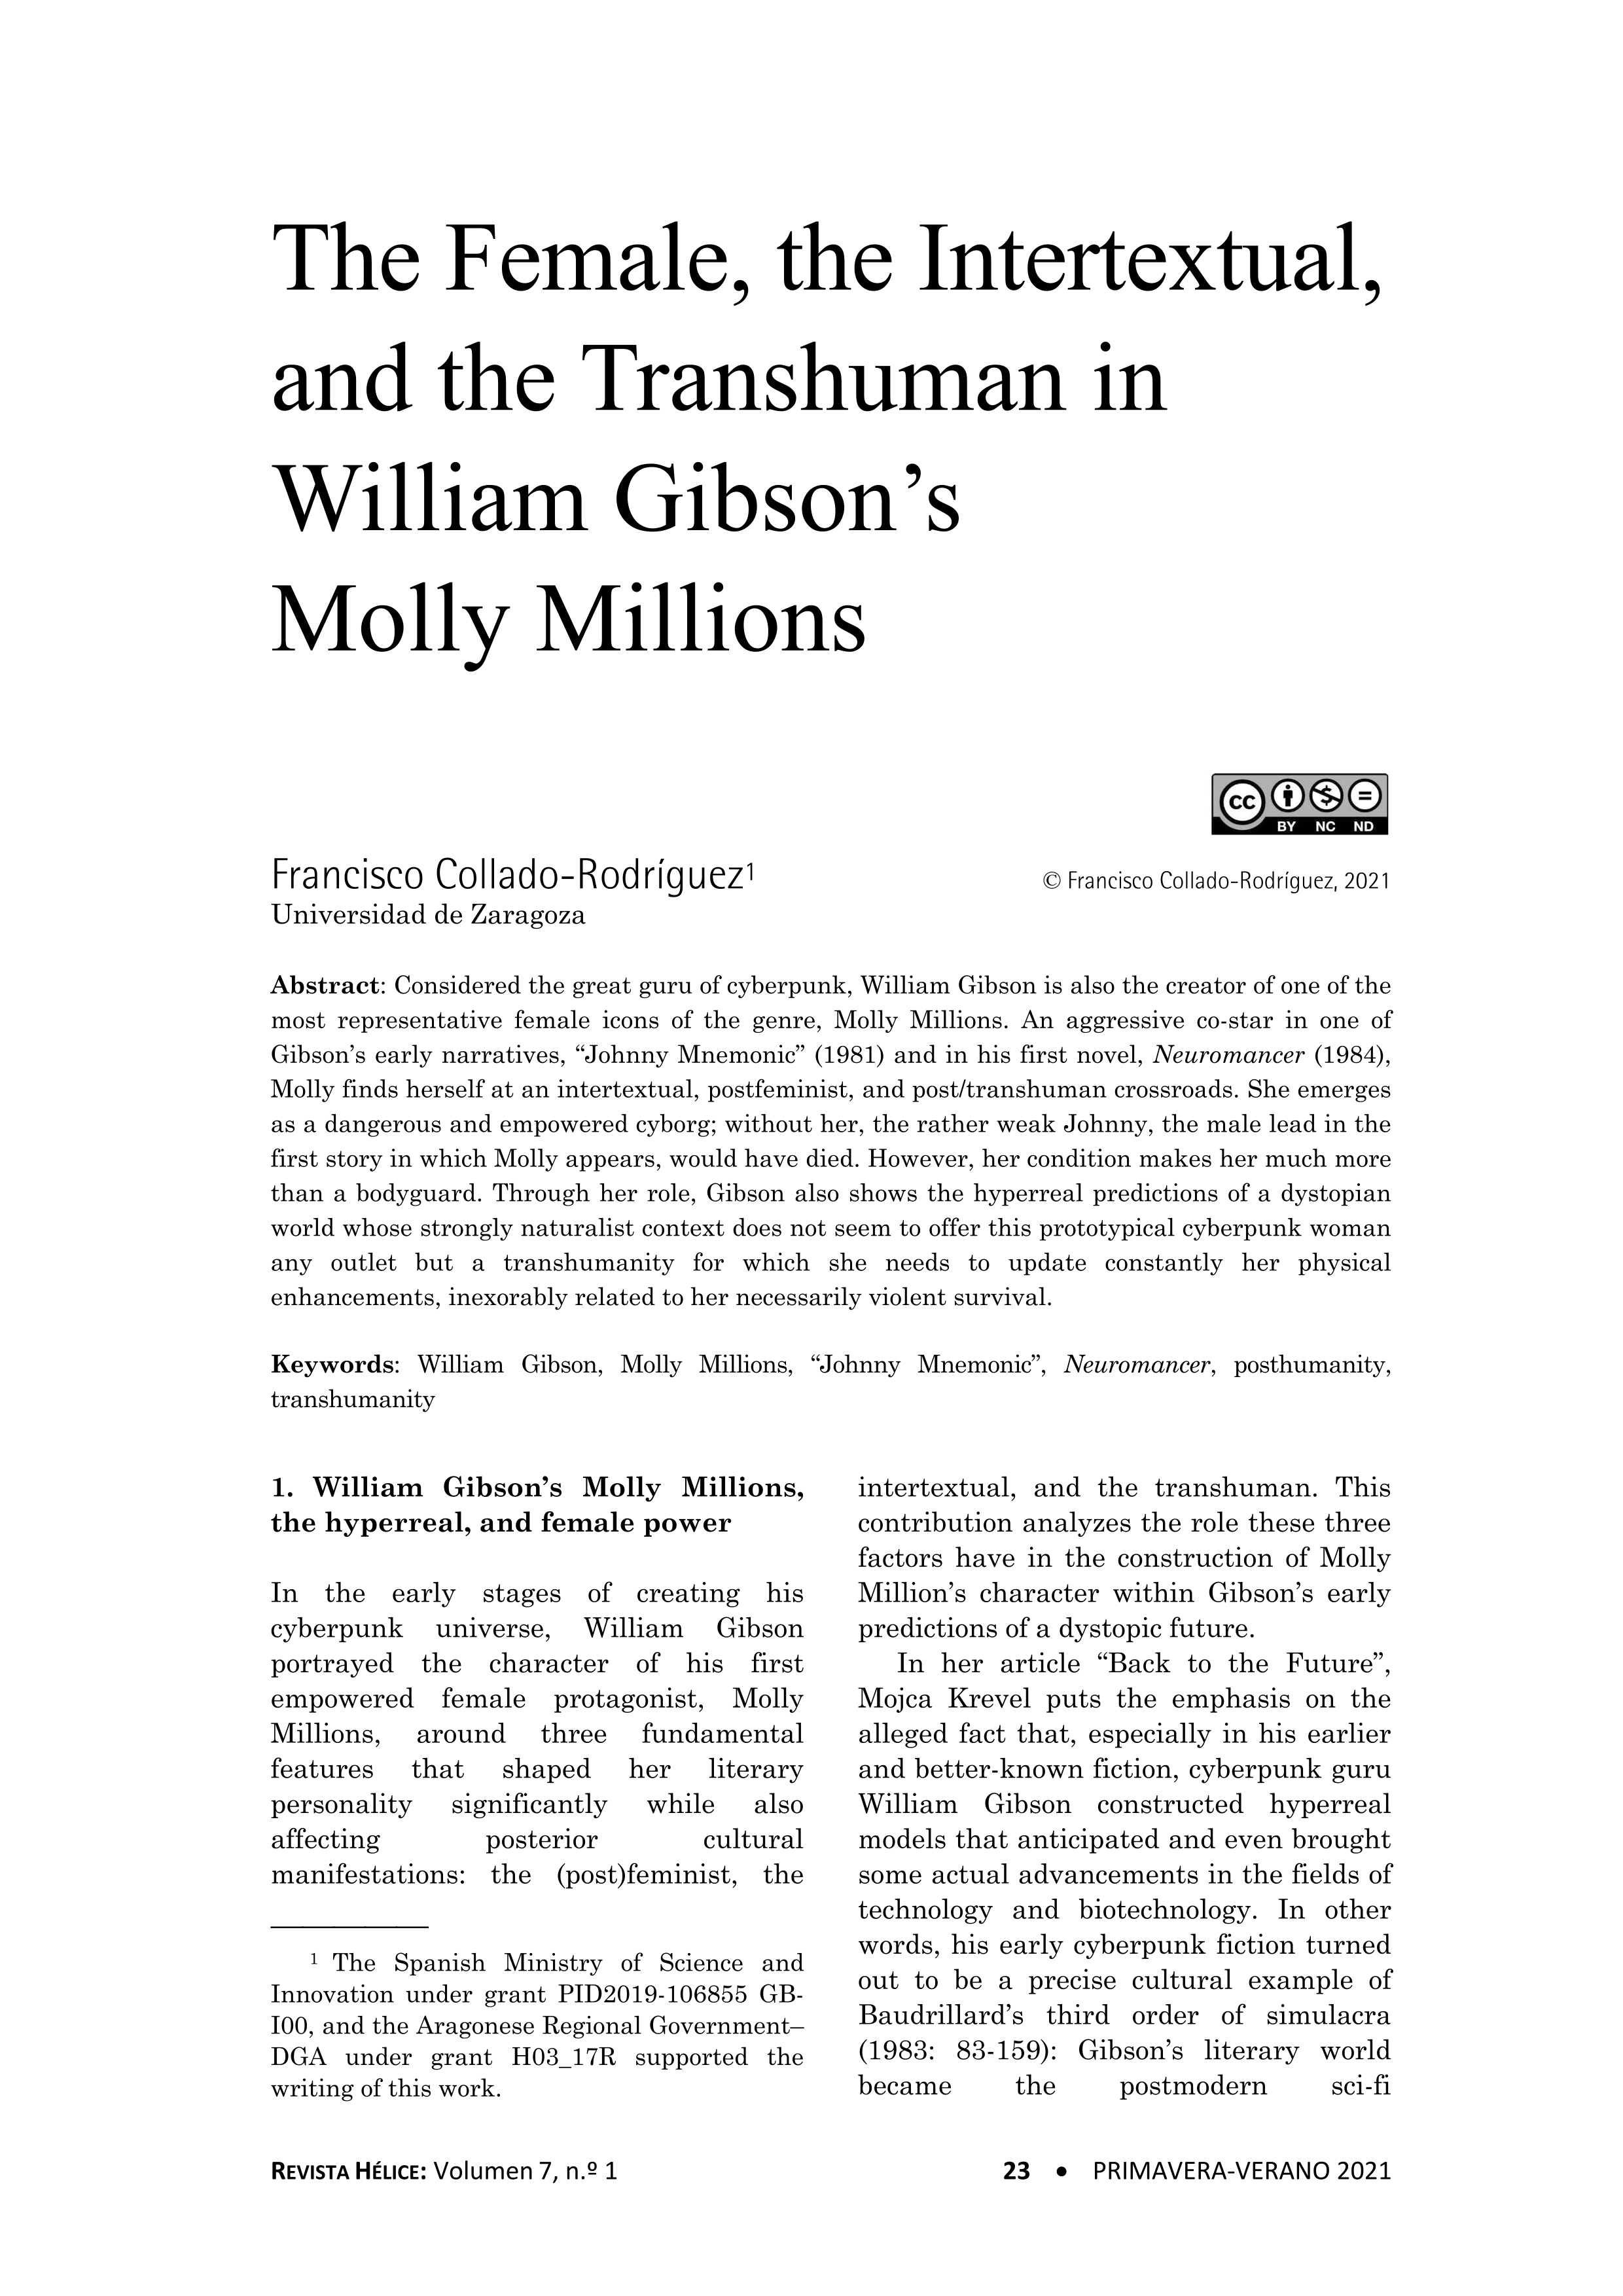 The female, the intertextual, and the transhuman in William Gibson’s Molly Millions